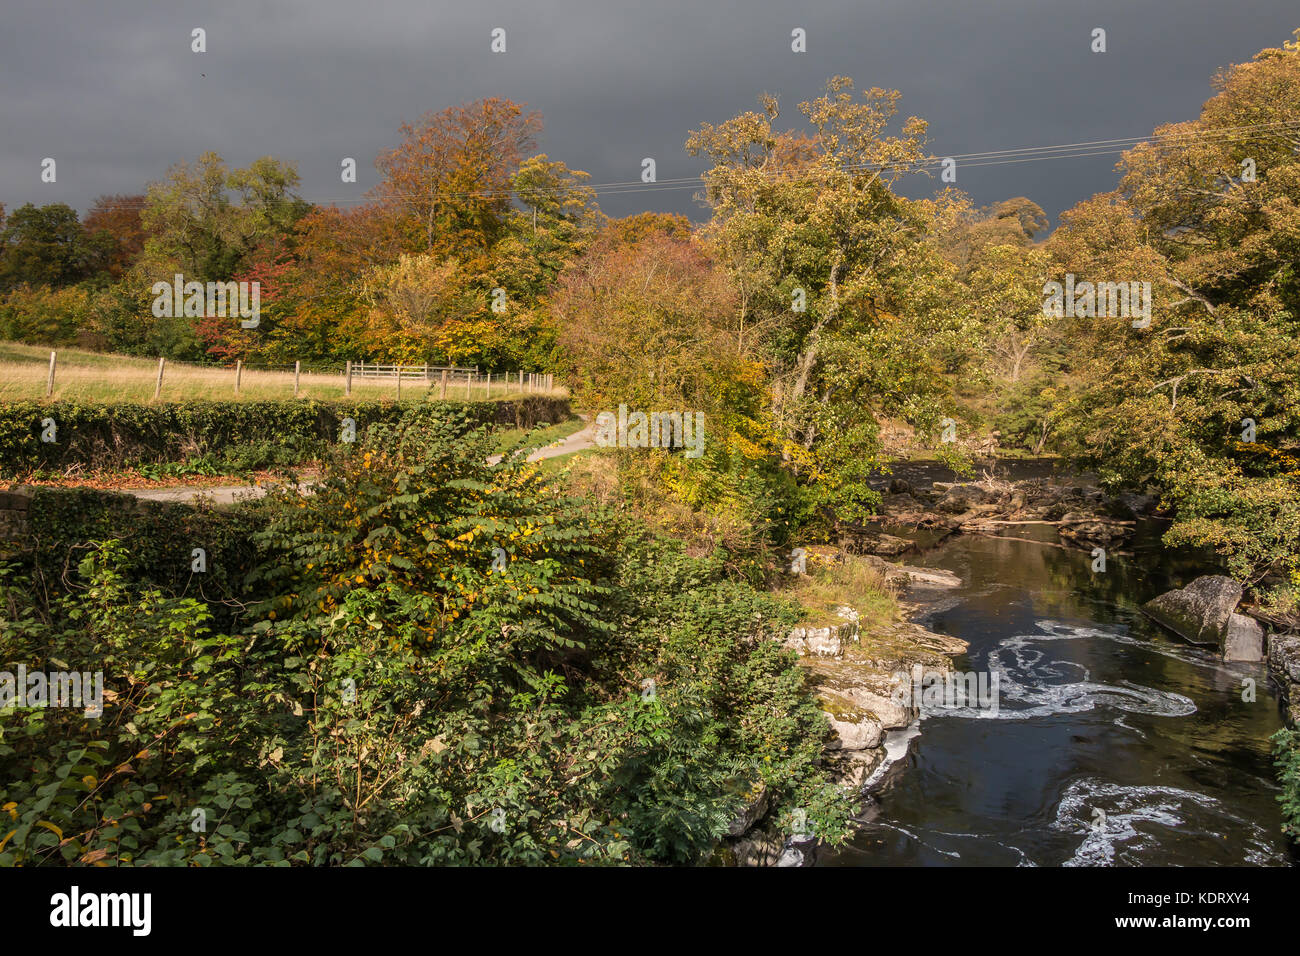 Teesdale landscape, The Meeting of the Waters - the confuence of the rivers Greta and Tees at Rokeby, near Barnard Castle, UK in autumn October 2017 Stock Photo